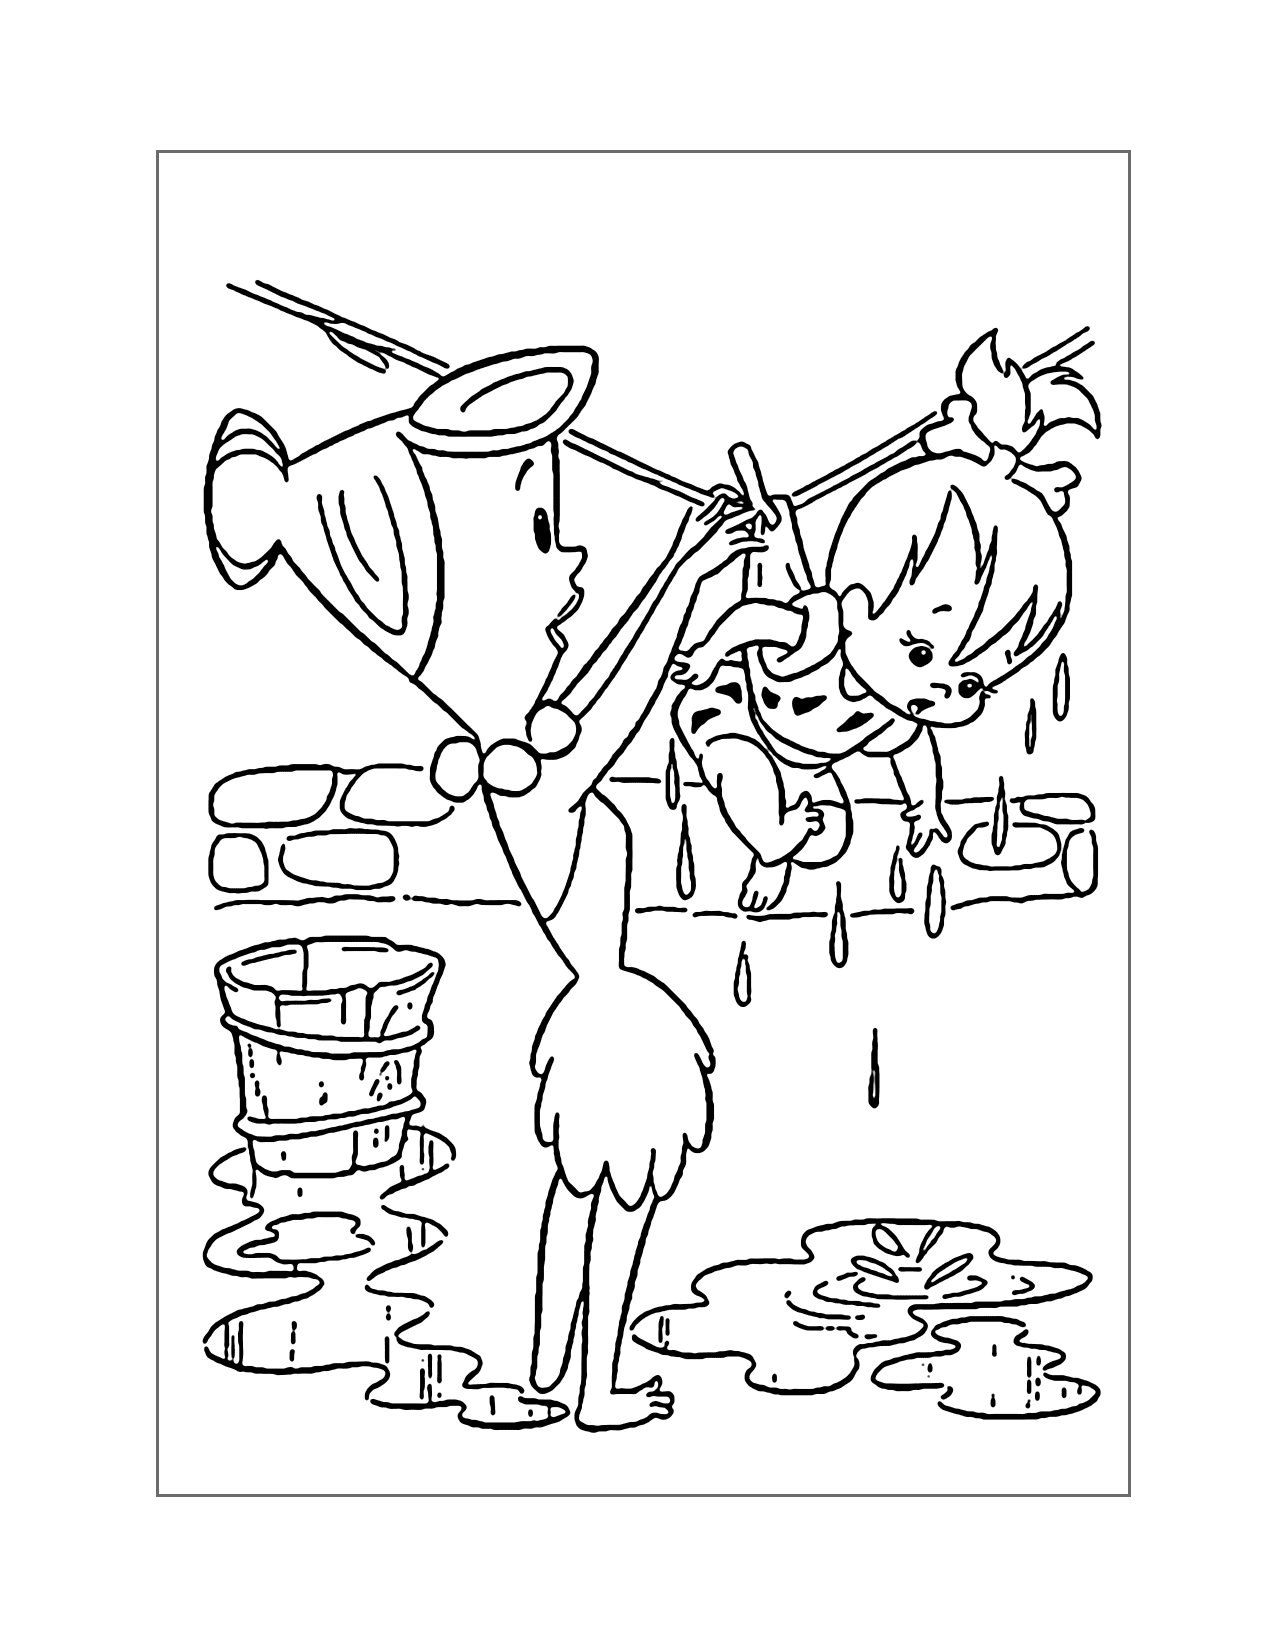 Wilma Flinstone Doing Laundry Coloring Page